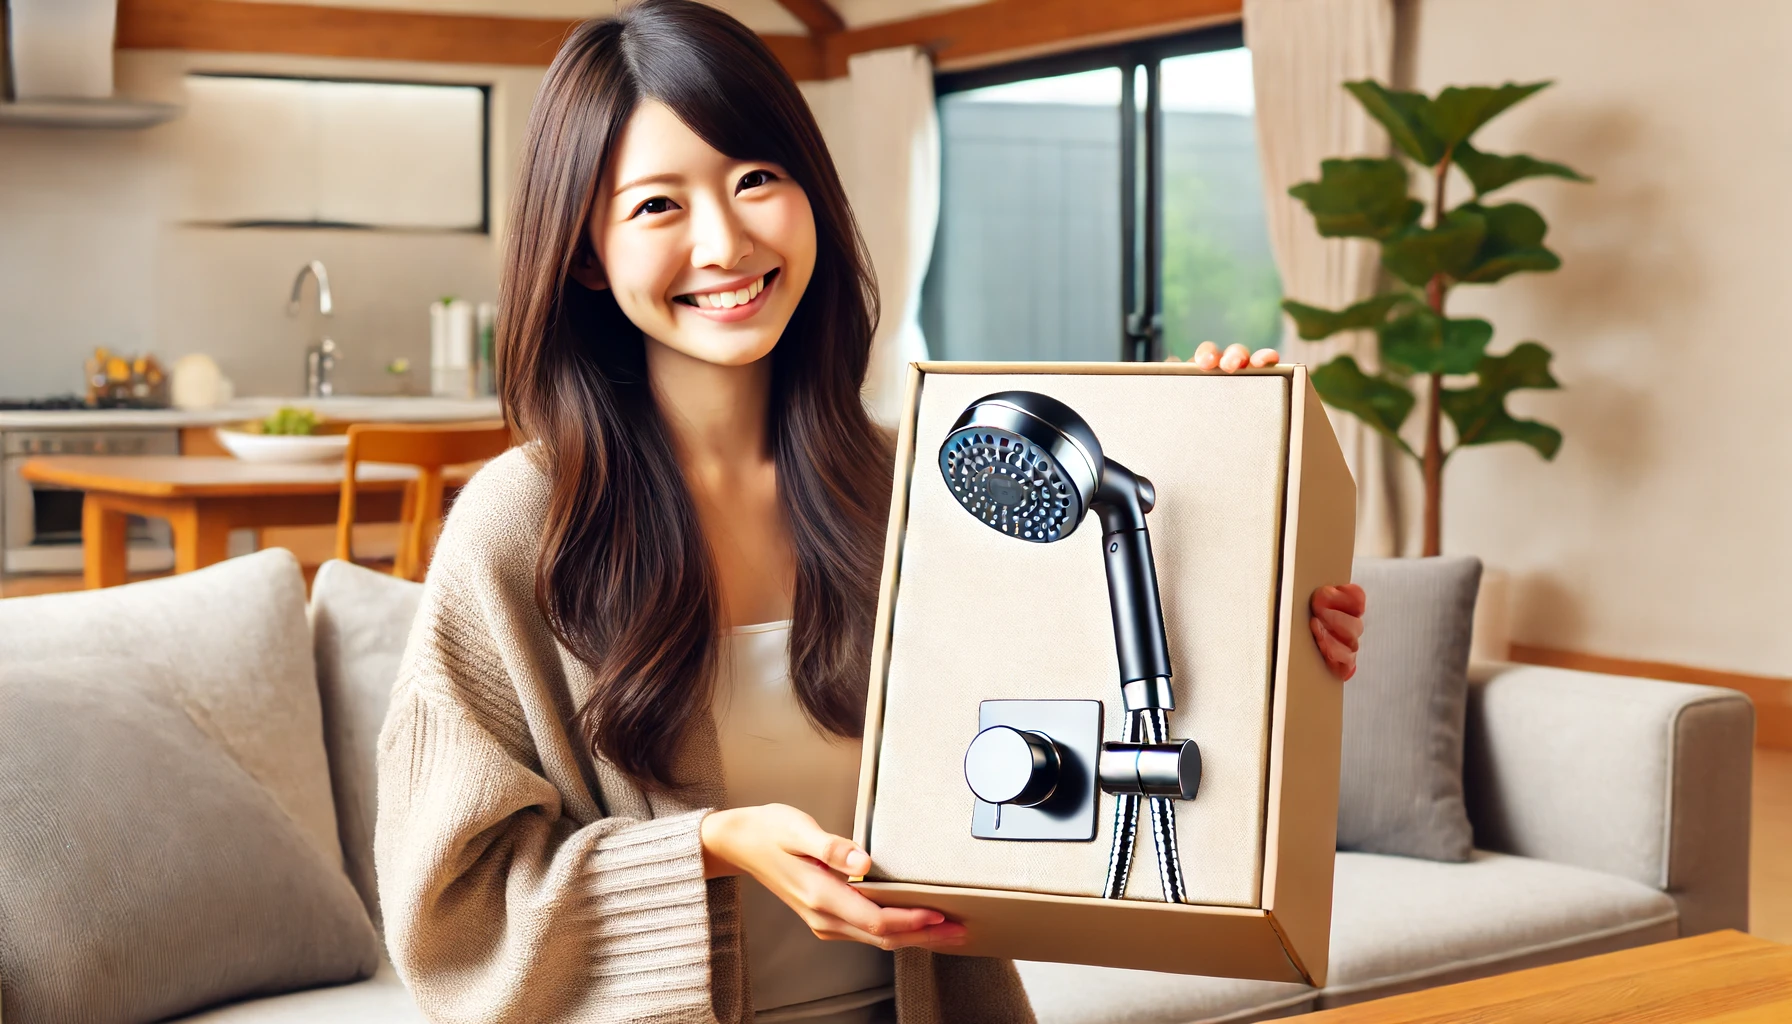 A Japanese woman holding a luxury handheld shower head box, just having acquired it. She is in a modern living room with a happy expression, excited about her new purchase.